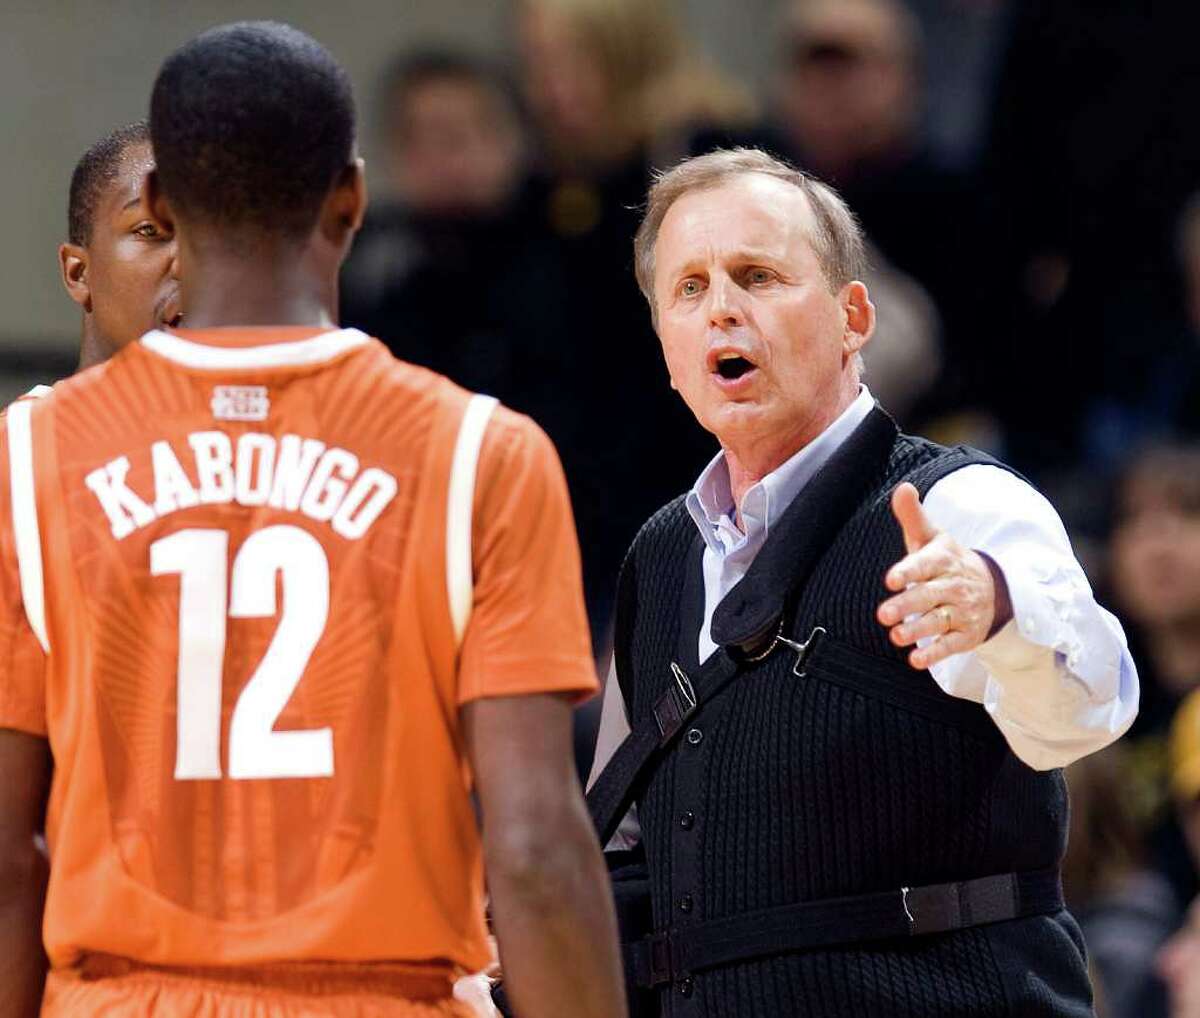 Texas head coach Rick Barneshopes players like Myck Kabongo will be able to win the Big 12 tournament and get an automatic bid into the NCAA tournament. (AP Photo/L.G. Patterson)